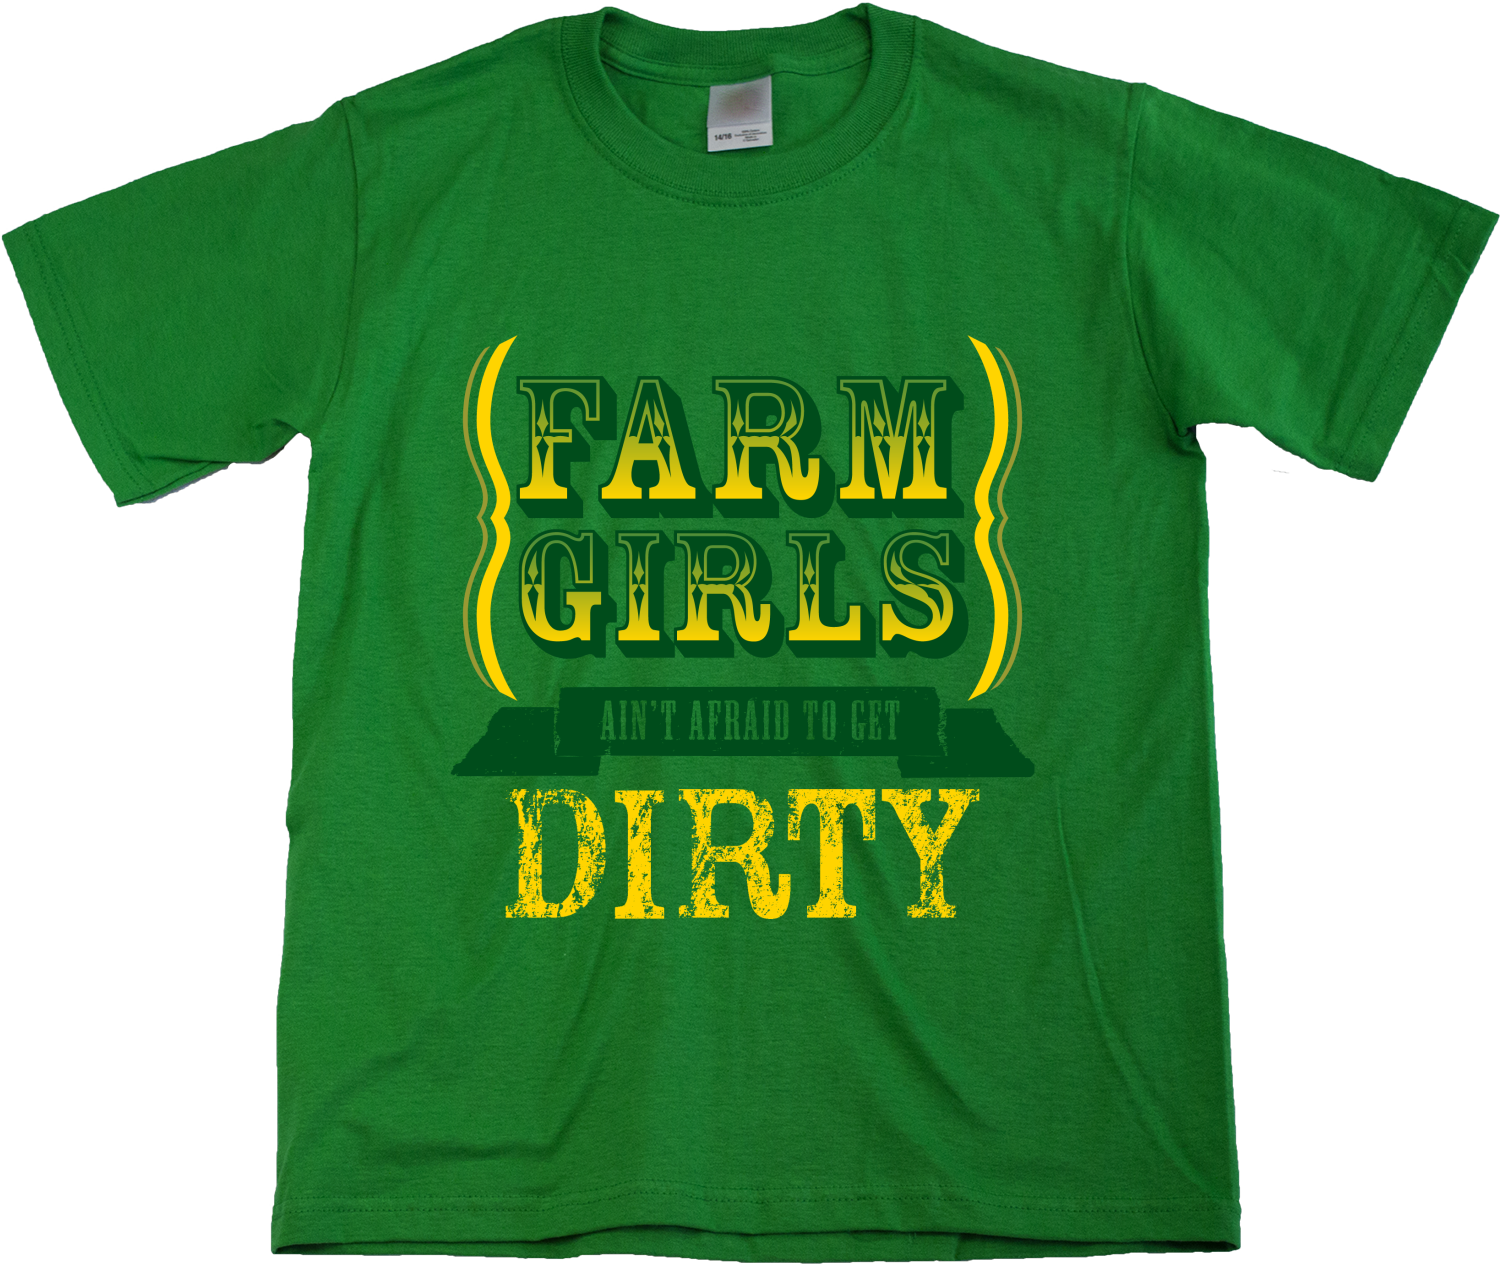 Youth Green Farm Girls Aren't Afraid to Get Dirty - Raunchy Country Humor T-shirt